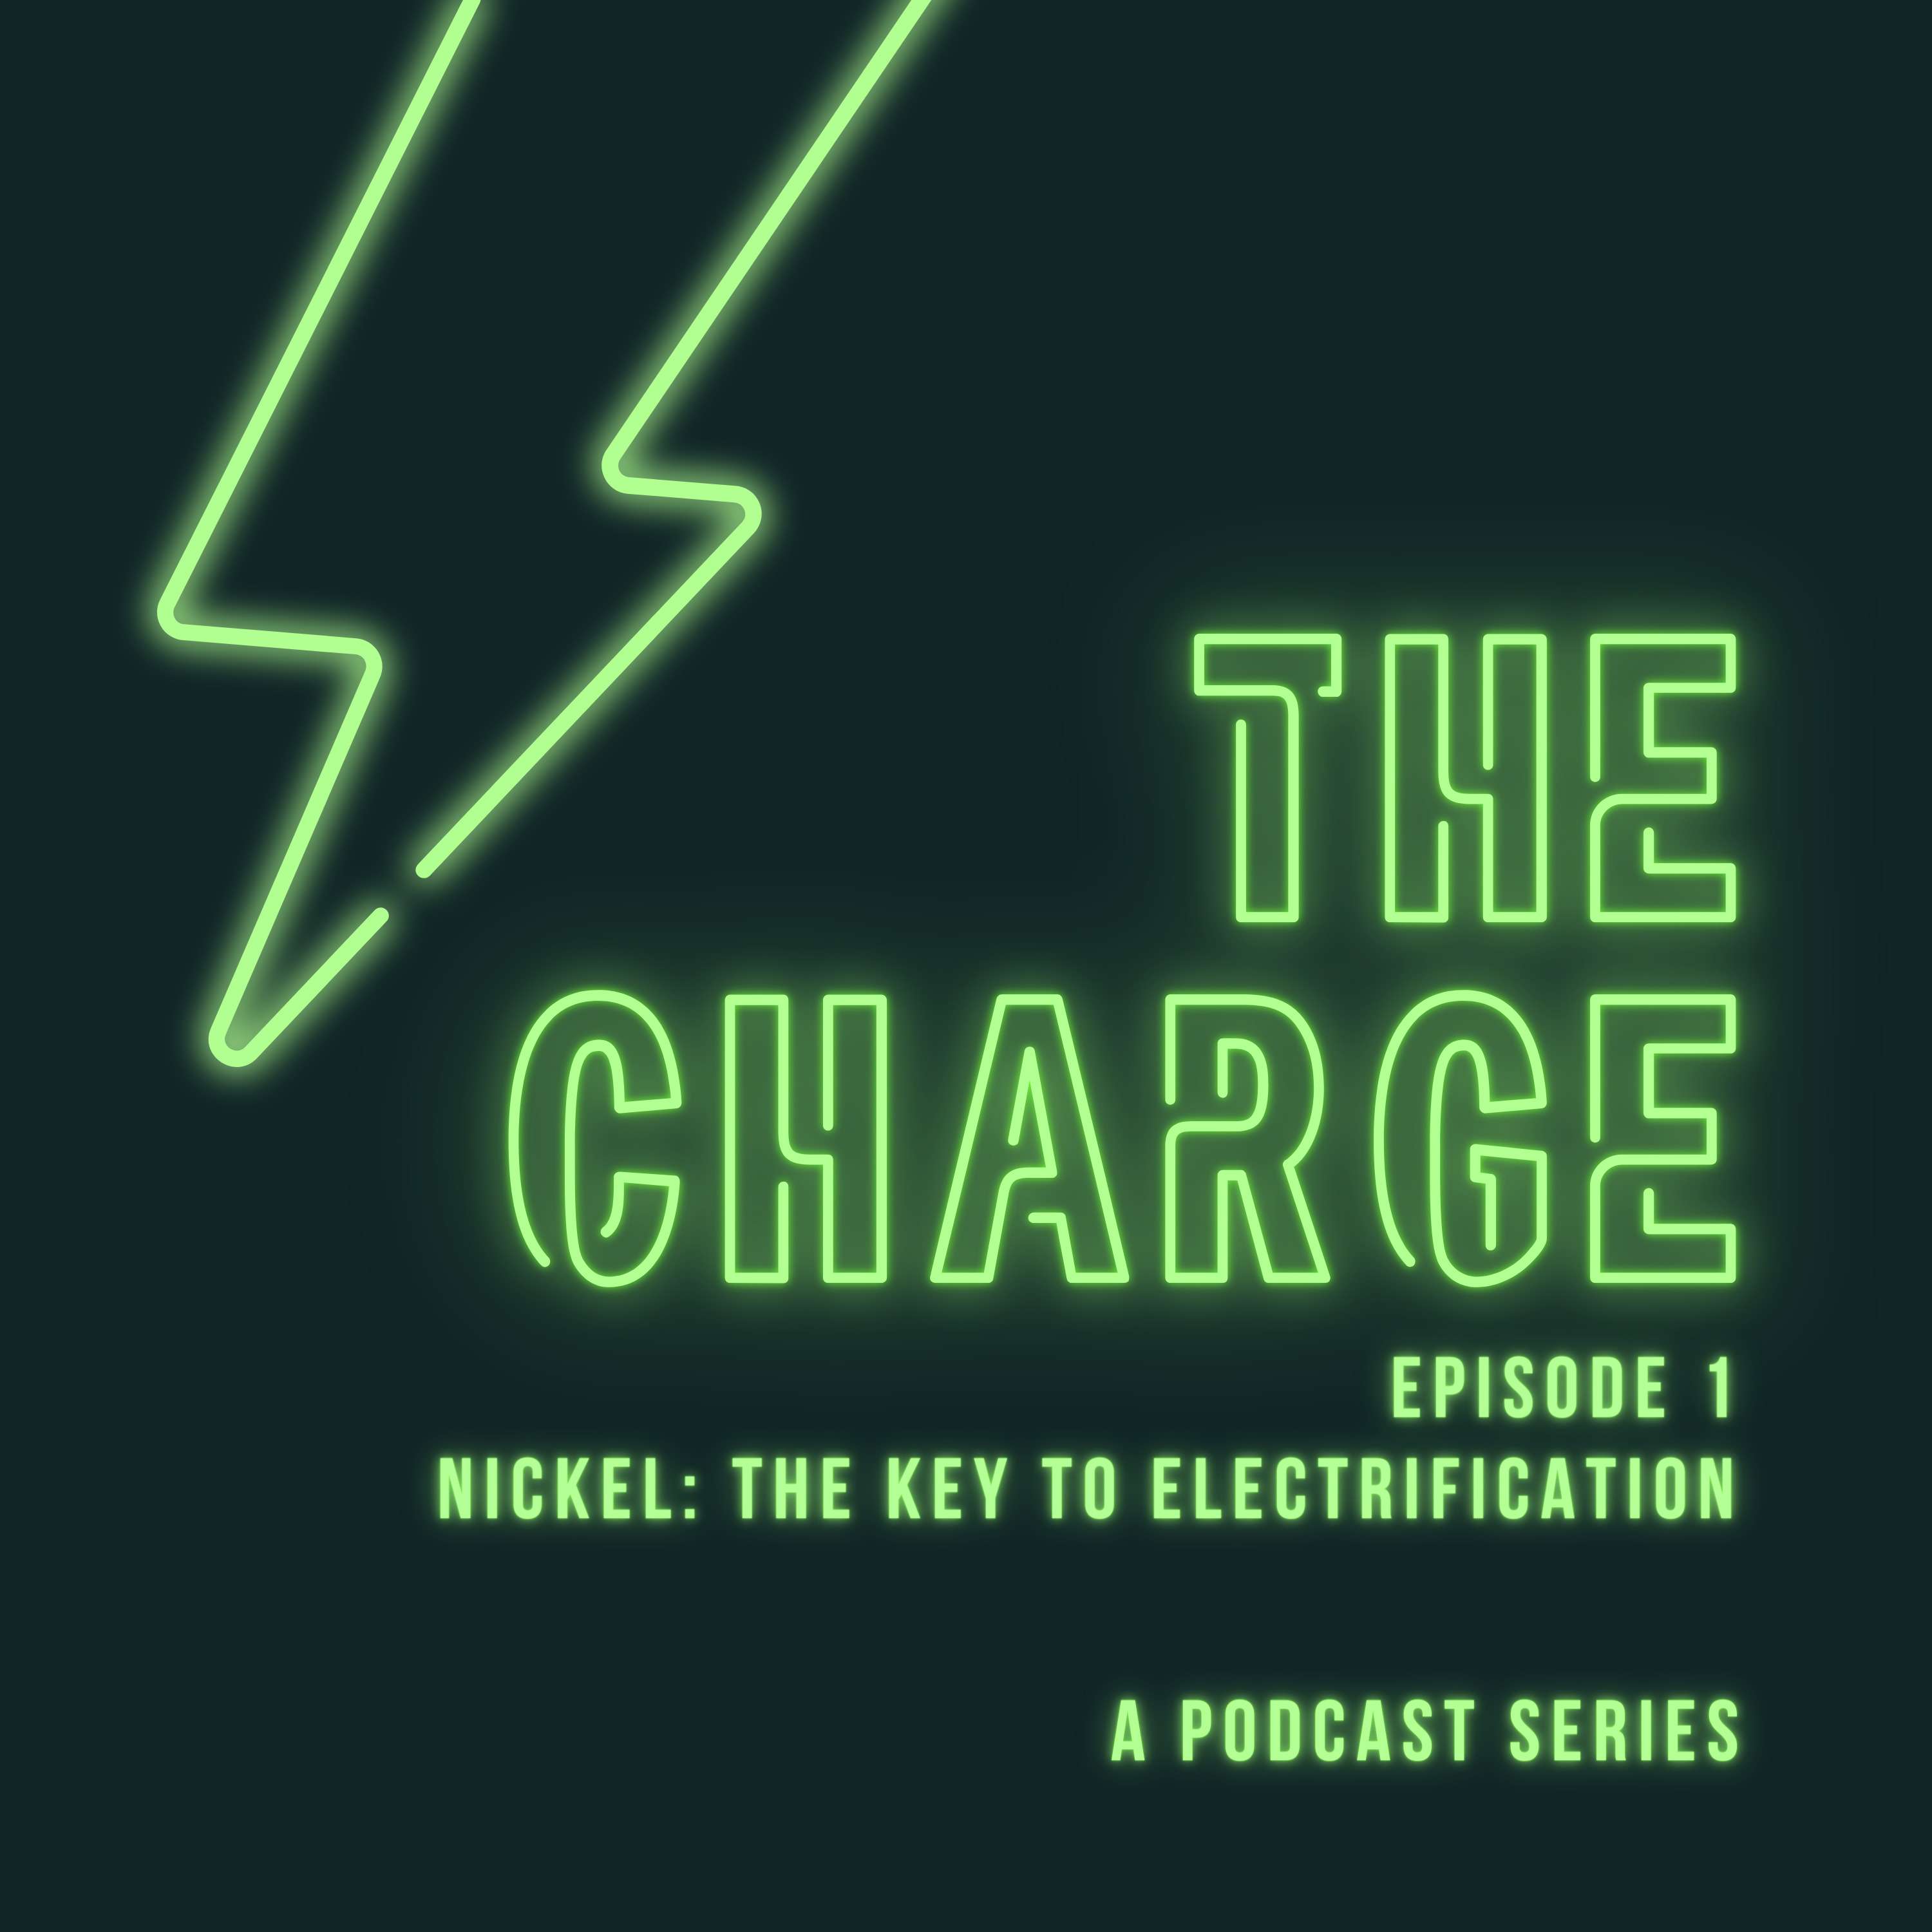 Nickel: The Key to Electrification